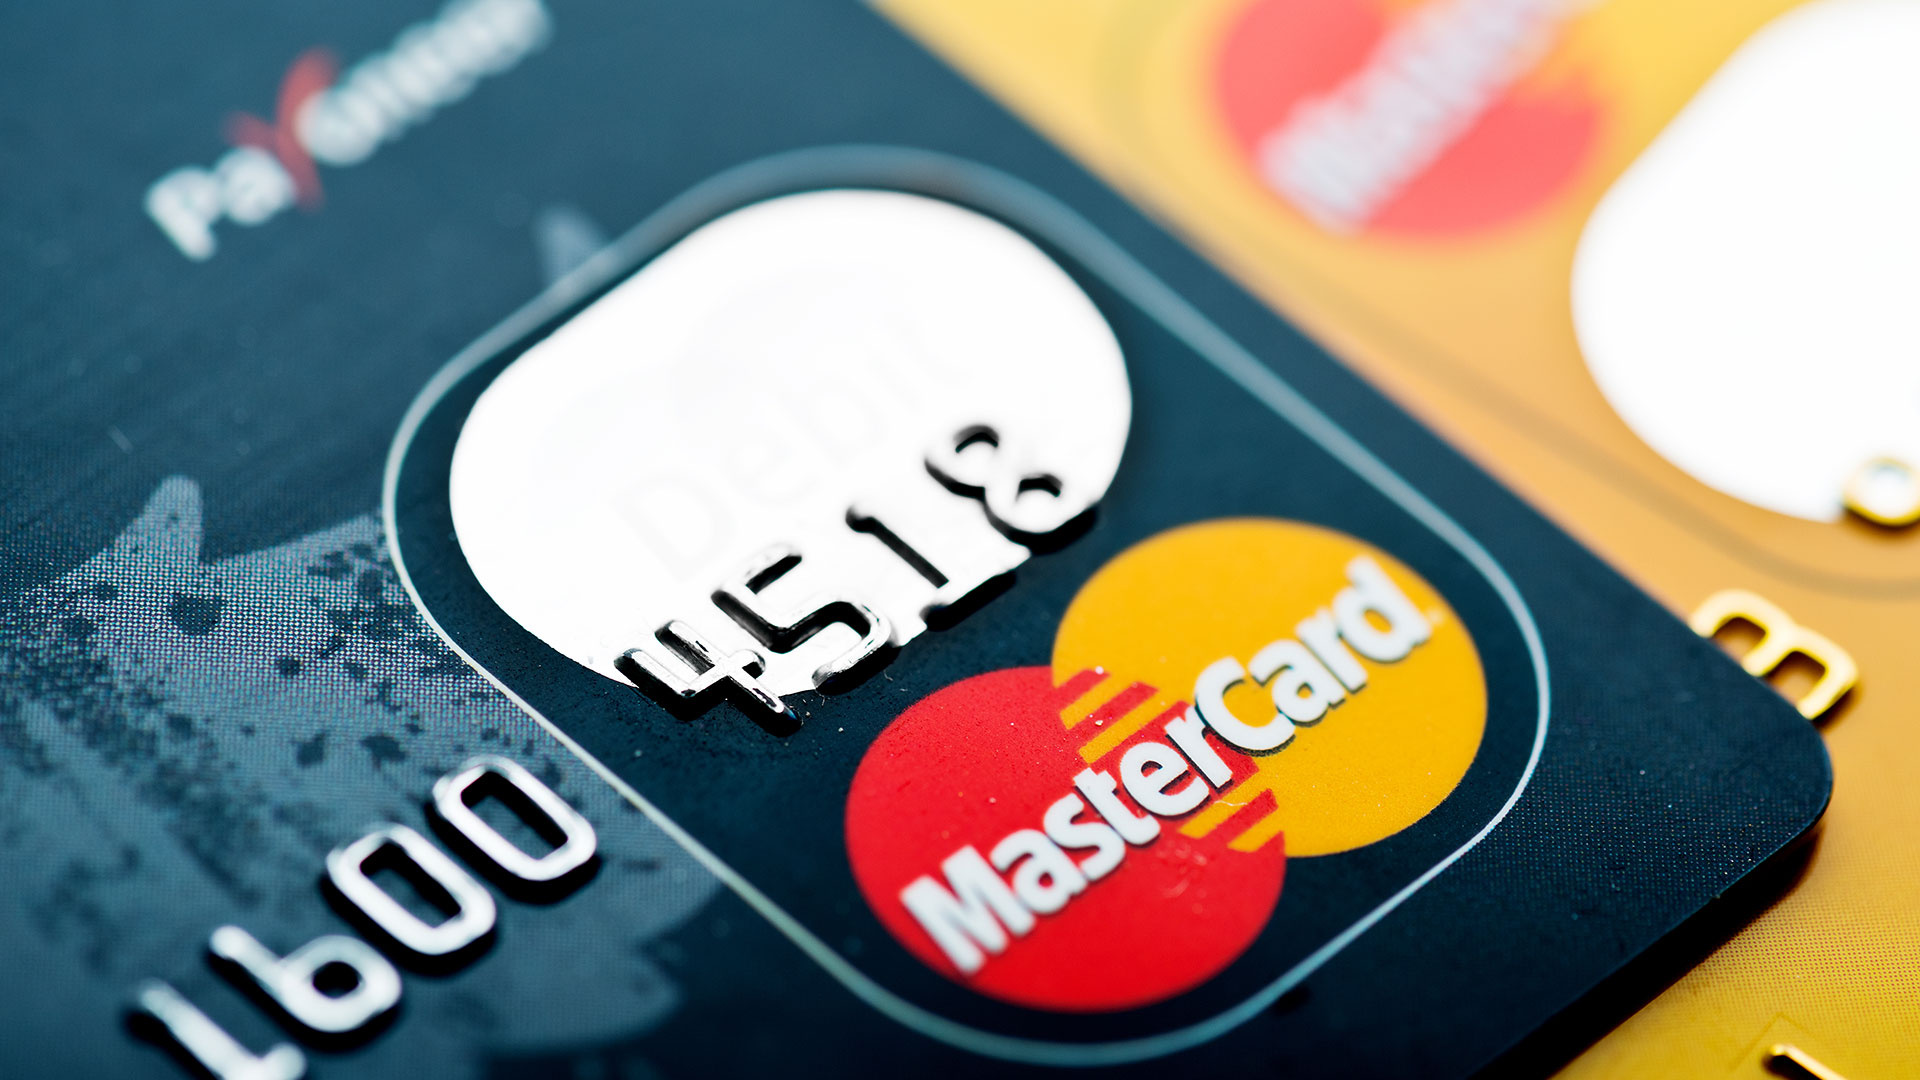 Mastercard: A payment card, Enabling a customer to access their financial accounts. 1920x1080 Full HD Wallpaper.